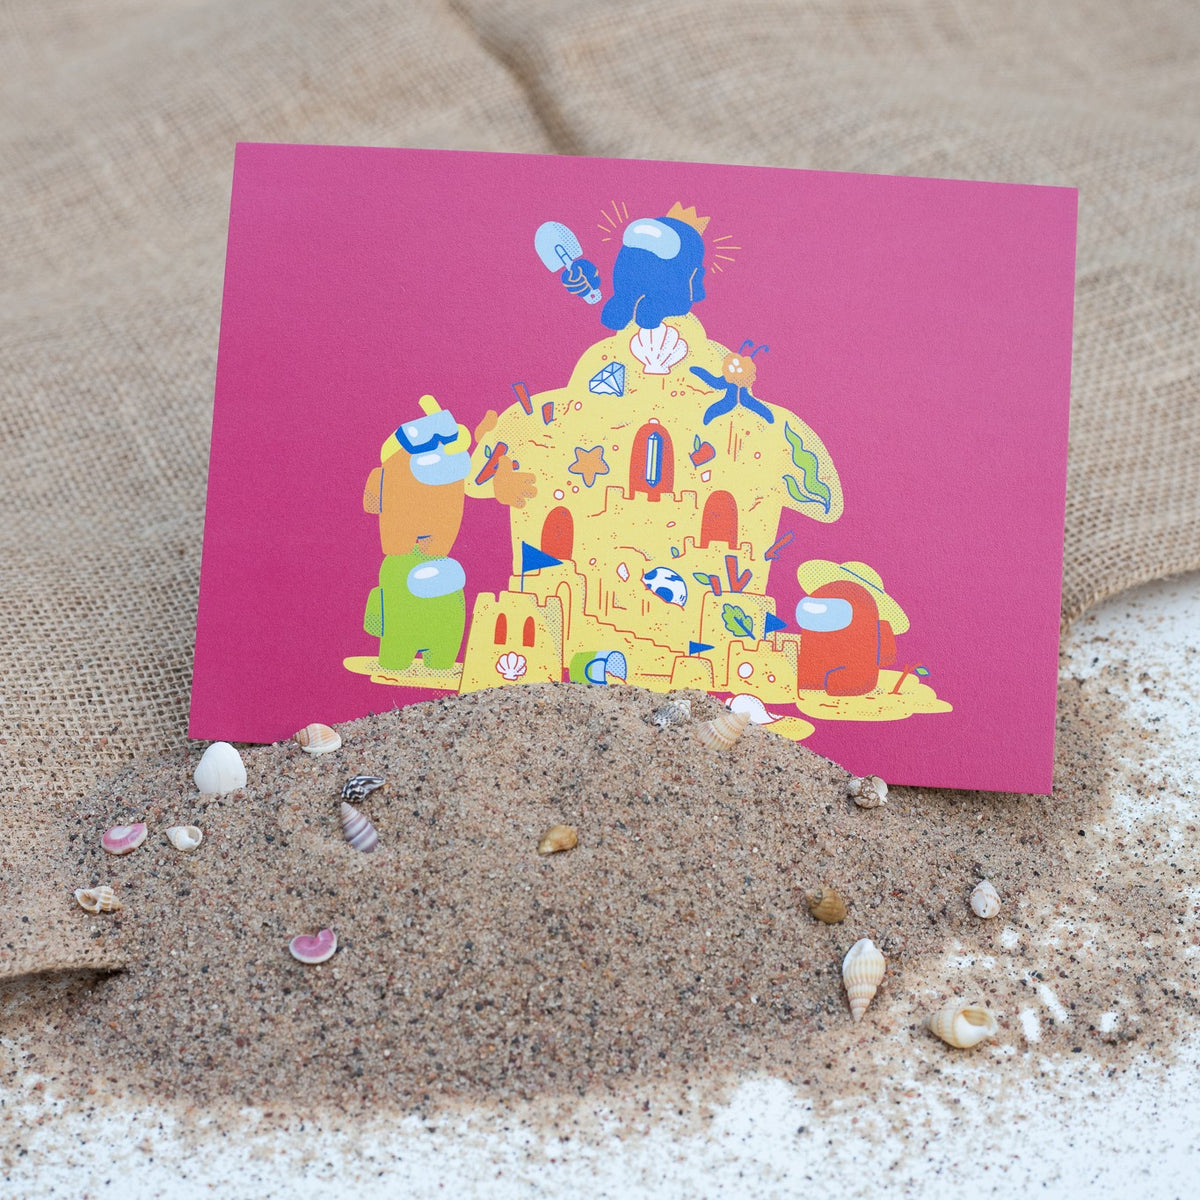 A photo of the sandcastle print sticking up in the sand.